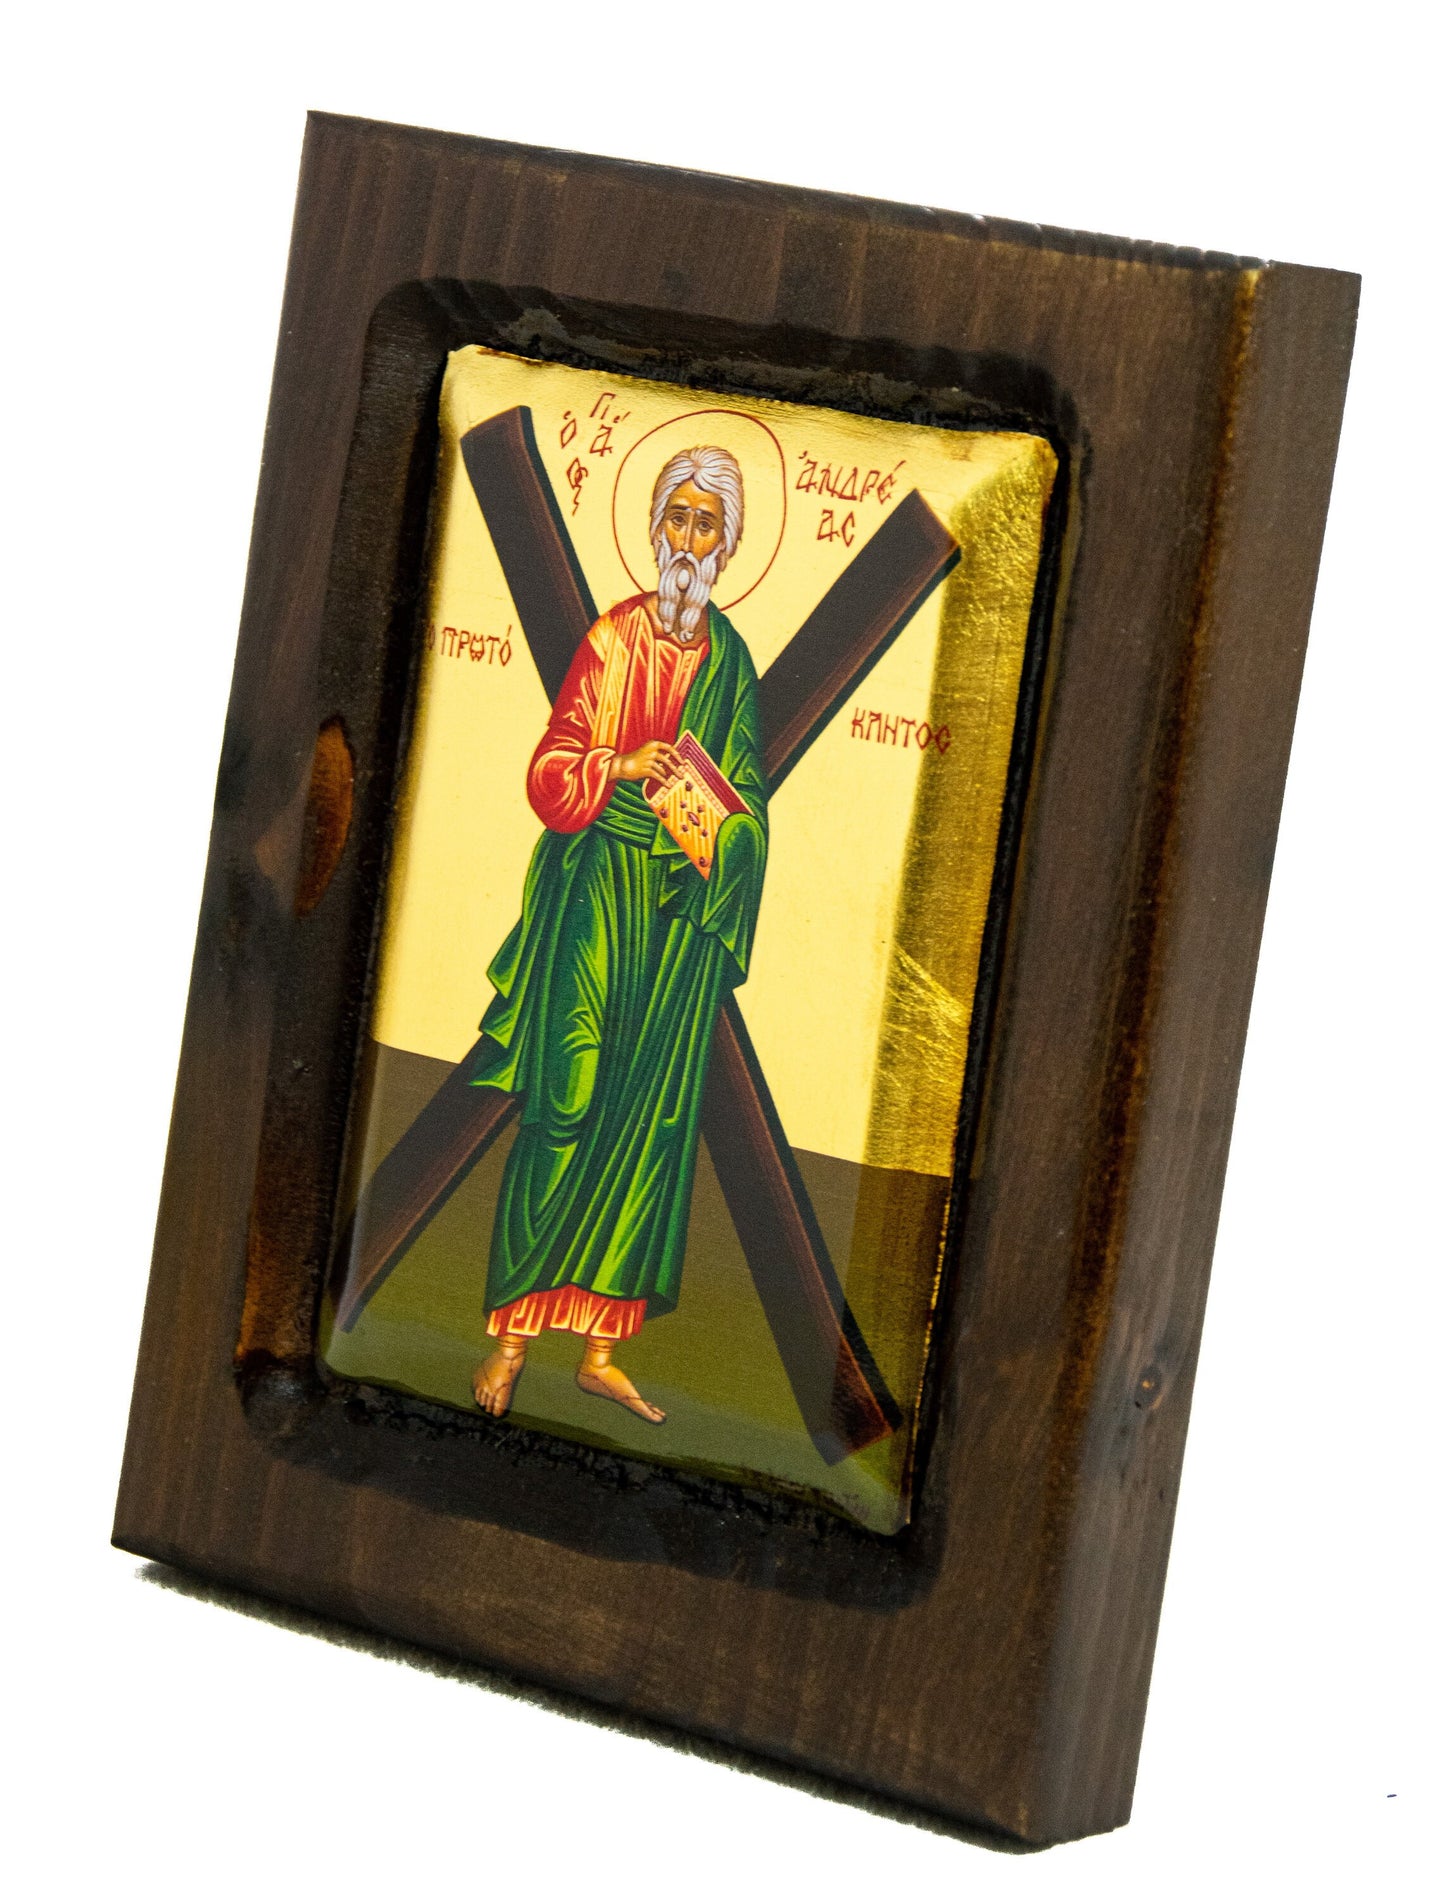 Saint Andrew icon the Apostle, Handmade Greek Orthodox icon of St Andrew, Byzantine art wall hanging wood plaque w/ gold leaf religious gift TheHolyArt